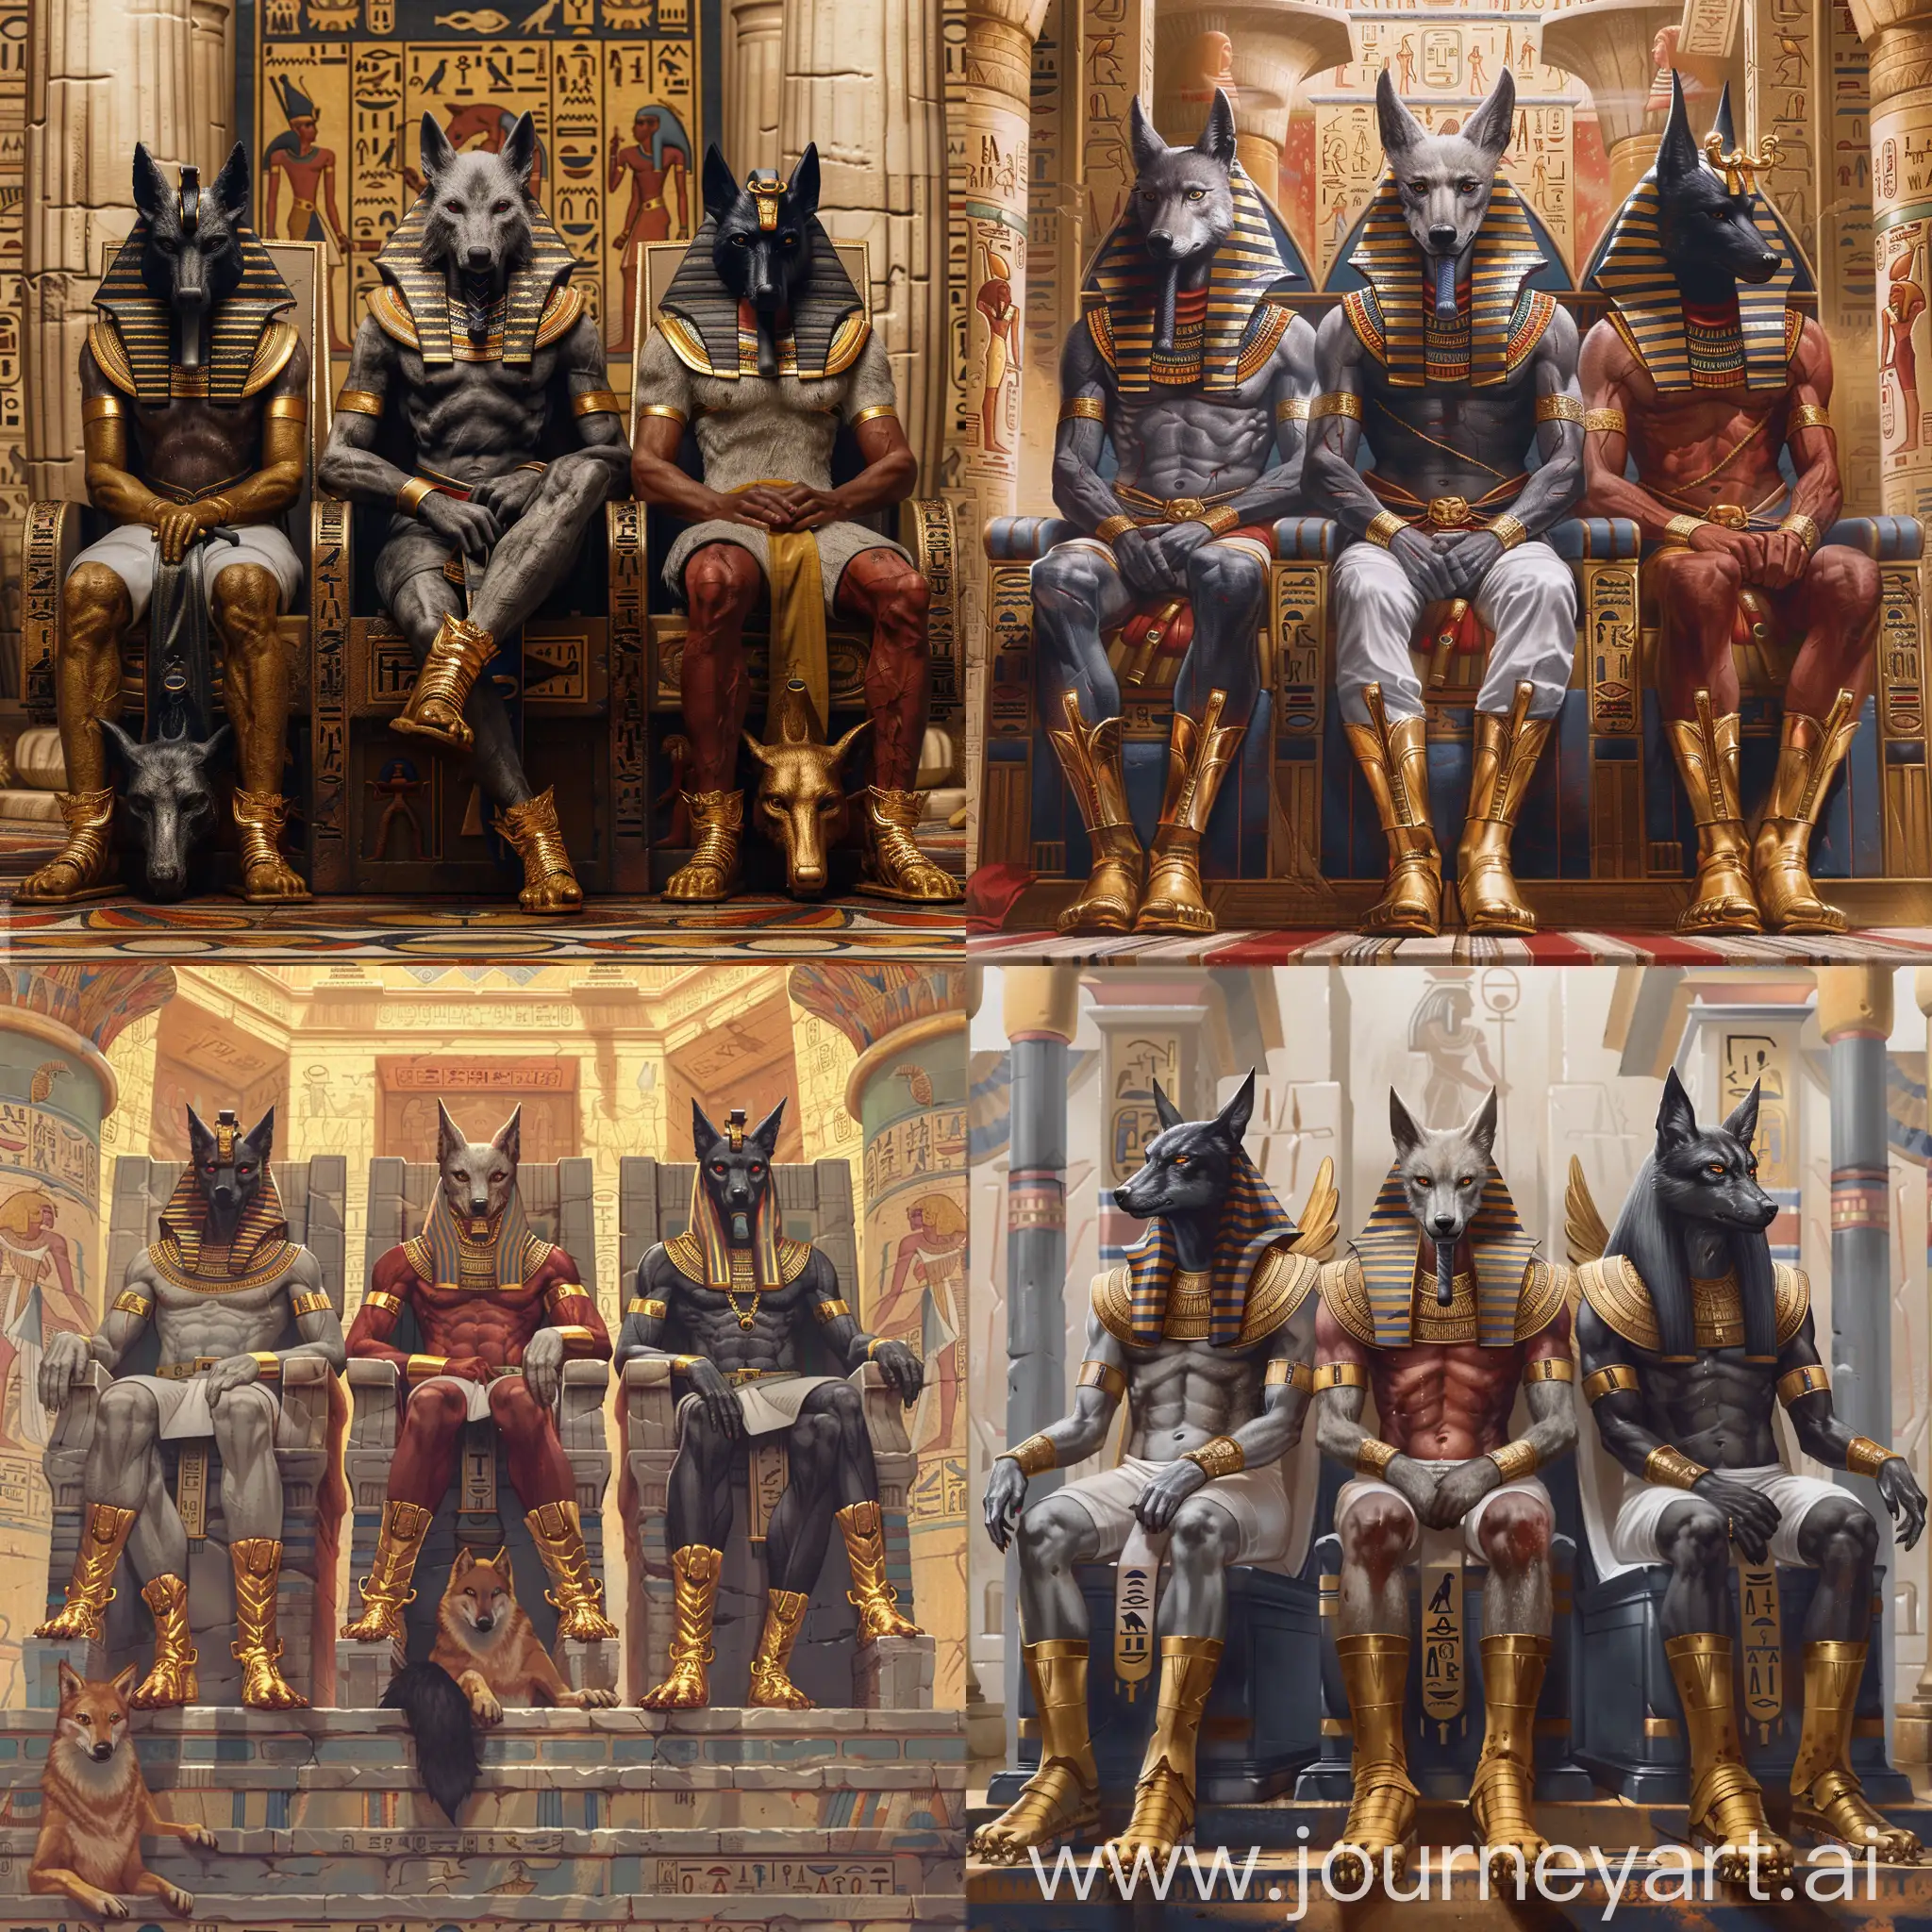 Three Egyptian Gods are sitting on their imperial thrones, they all have their own jackal wolf head and golden boots.

The first one is Wepwawet with light gray skin.
The second middle one is Set with dark red skin.
The third left one is Anubis with light black skin.

They are all inside a splendid Egyptian temple.